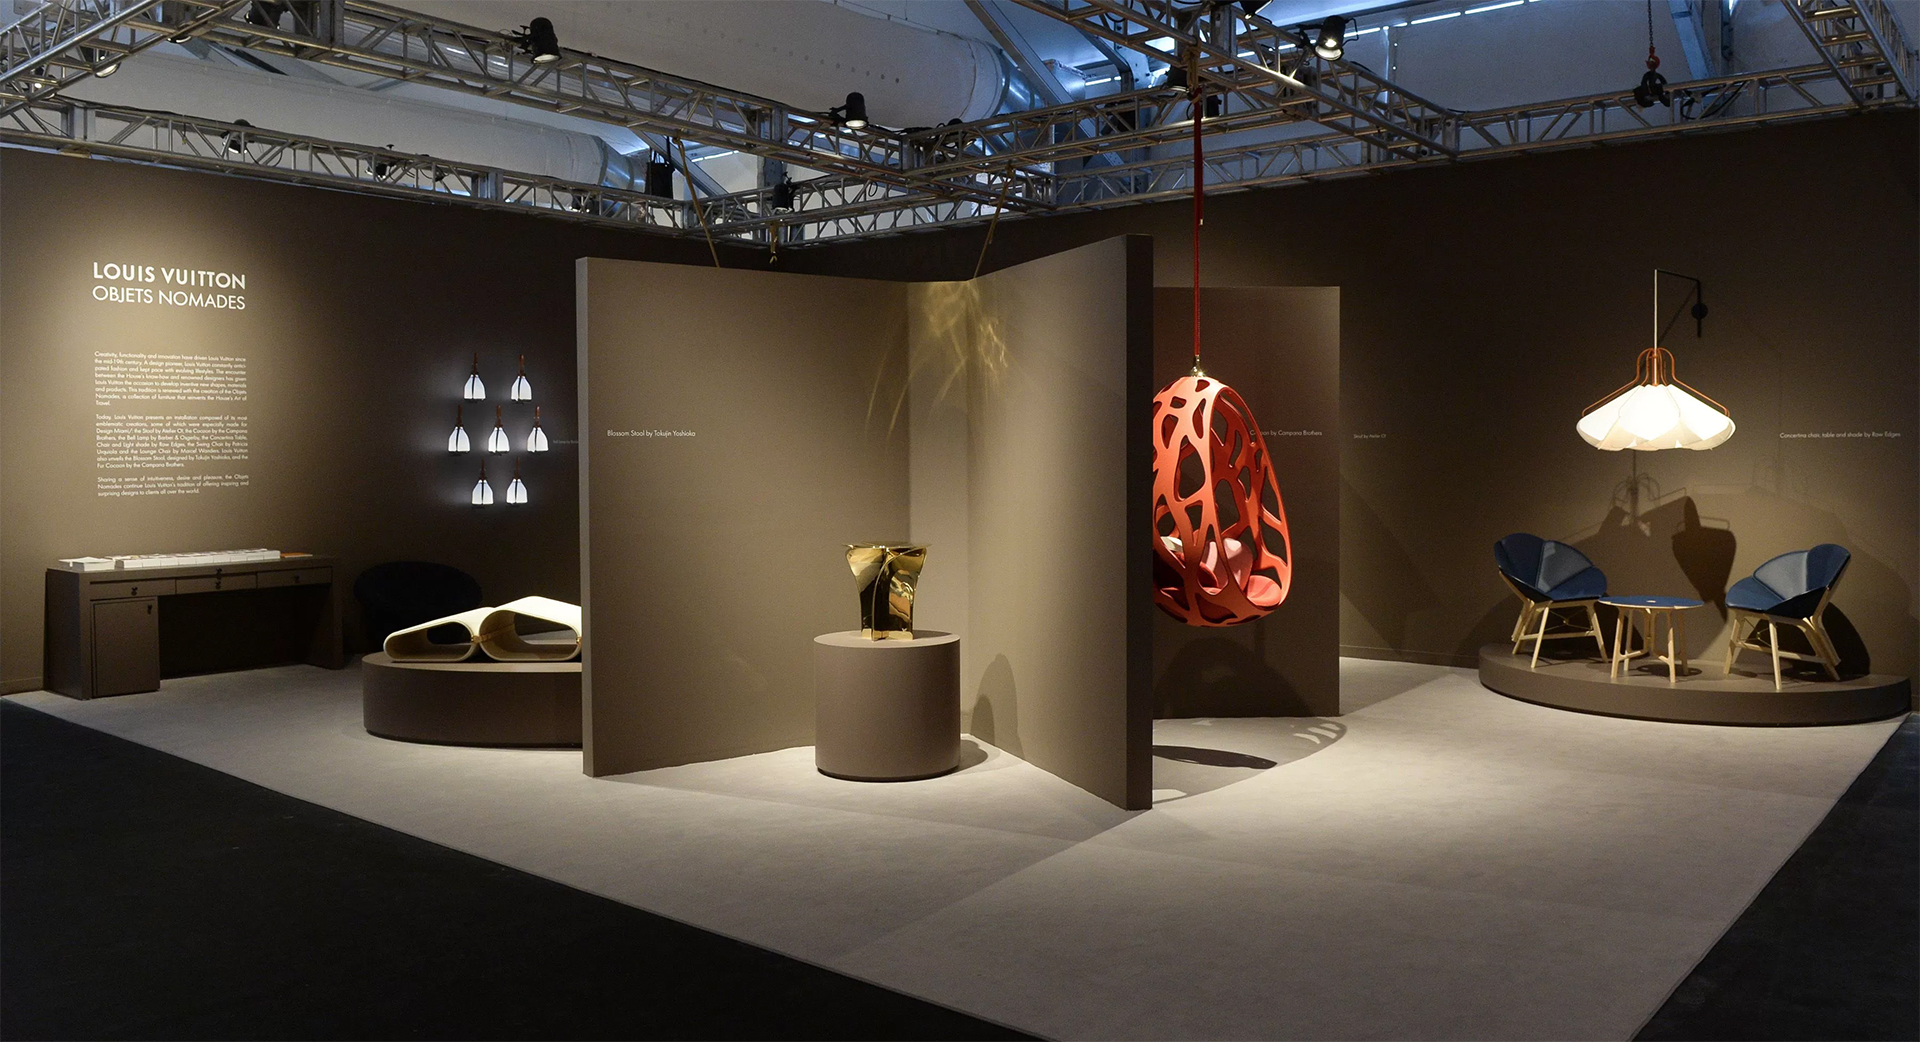 Louis Vuitton, Objets Nomades: Magnificent Event At Fuorisalone 2019 -  Inspiration Design Books Blog